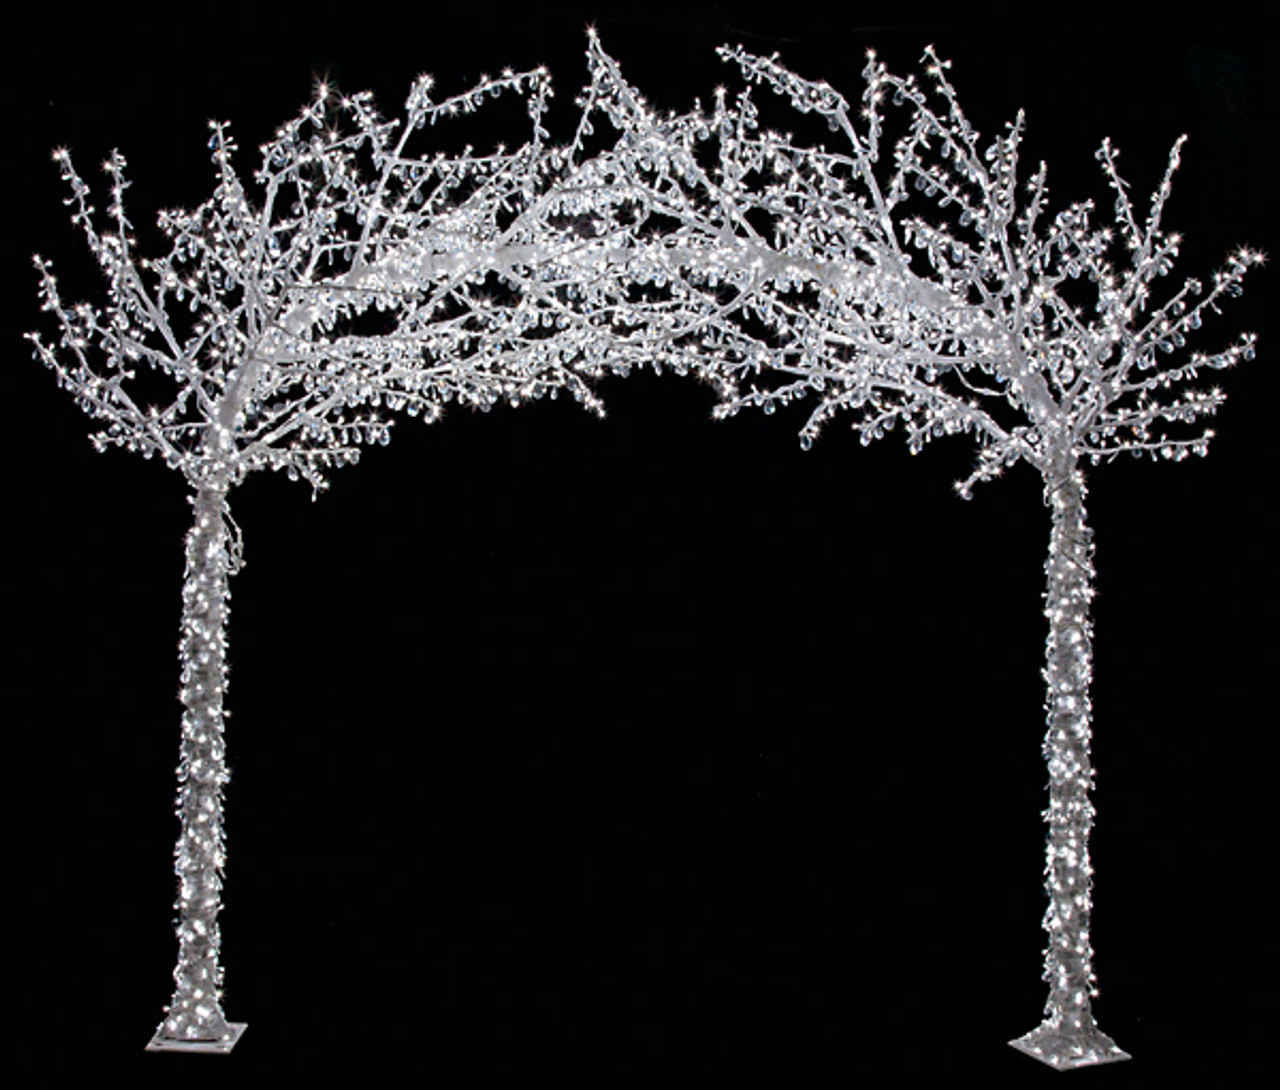 9' x 12 White Garland with Multi-Function LED Rice Lights